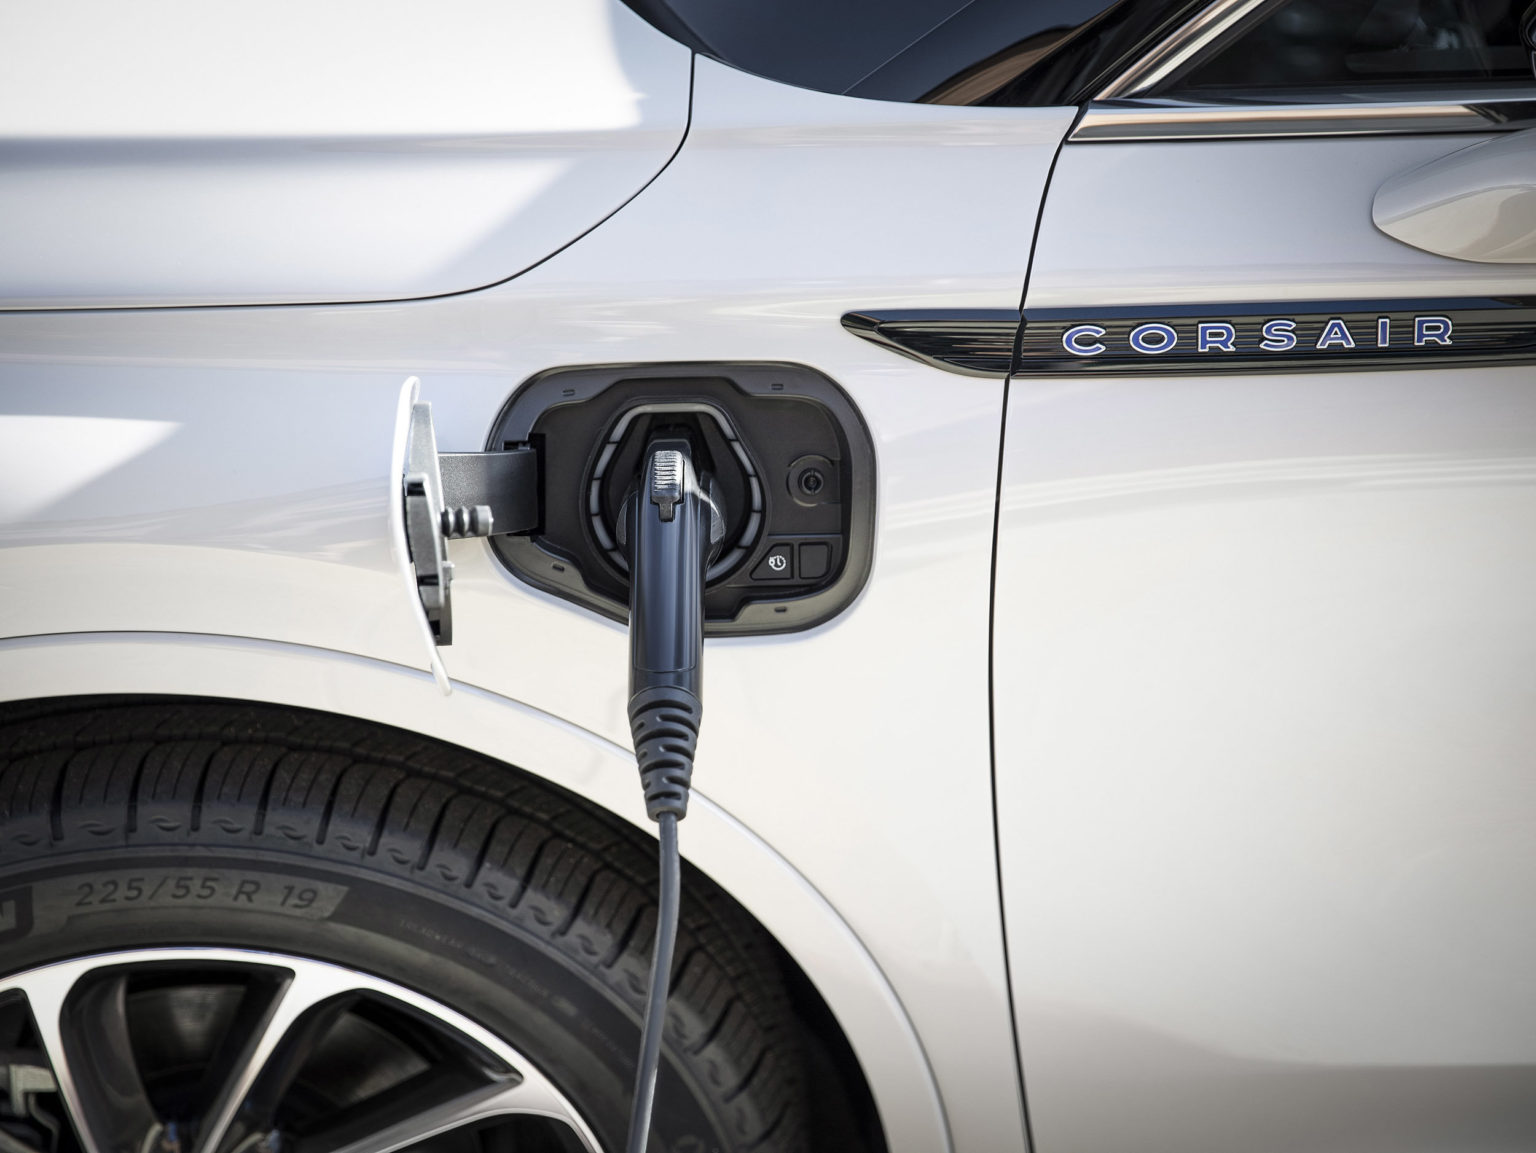 Lincoln and other automakers are creating all-electric vehicles that can utilize vast charging networks like Electrify America's.